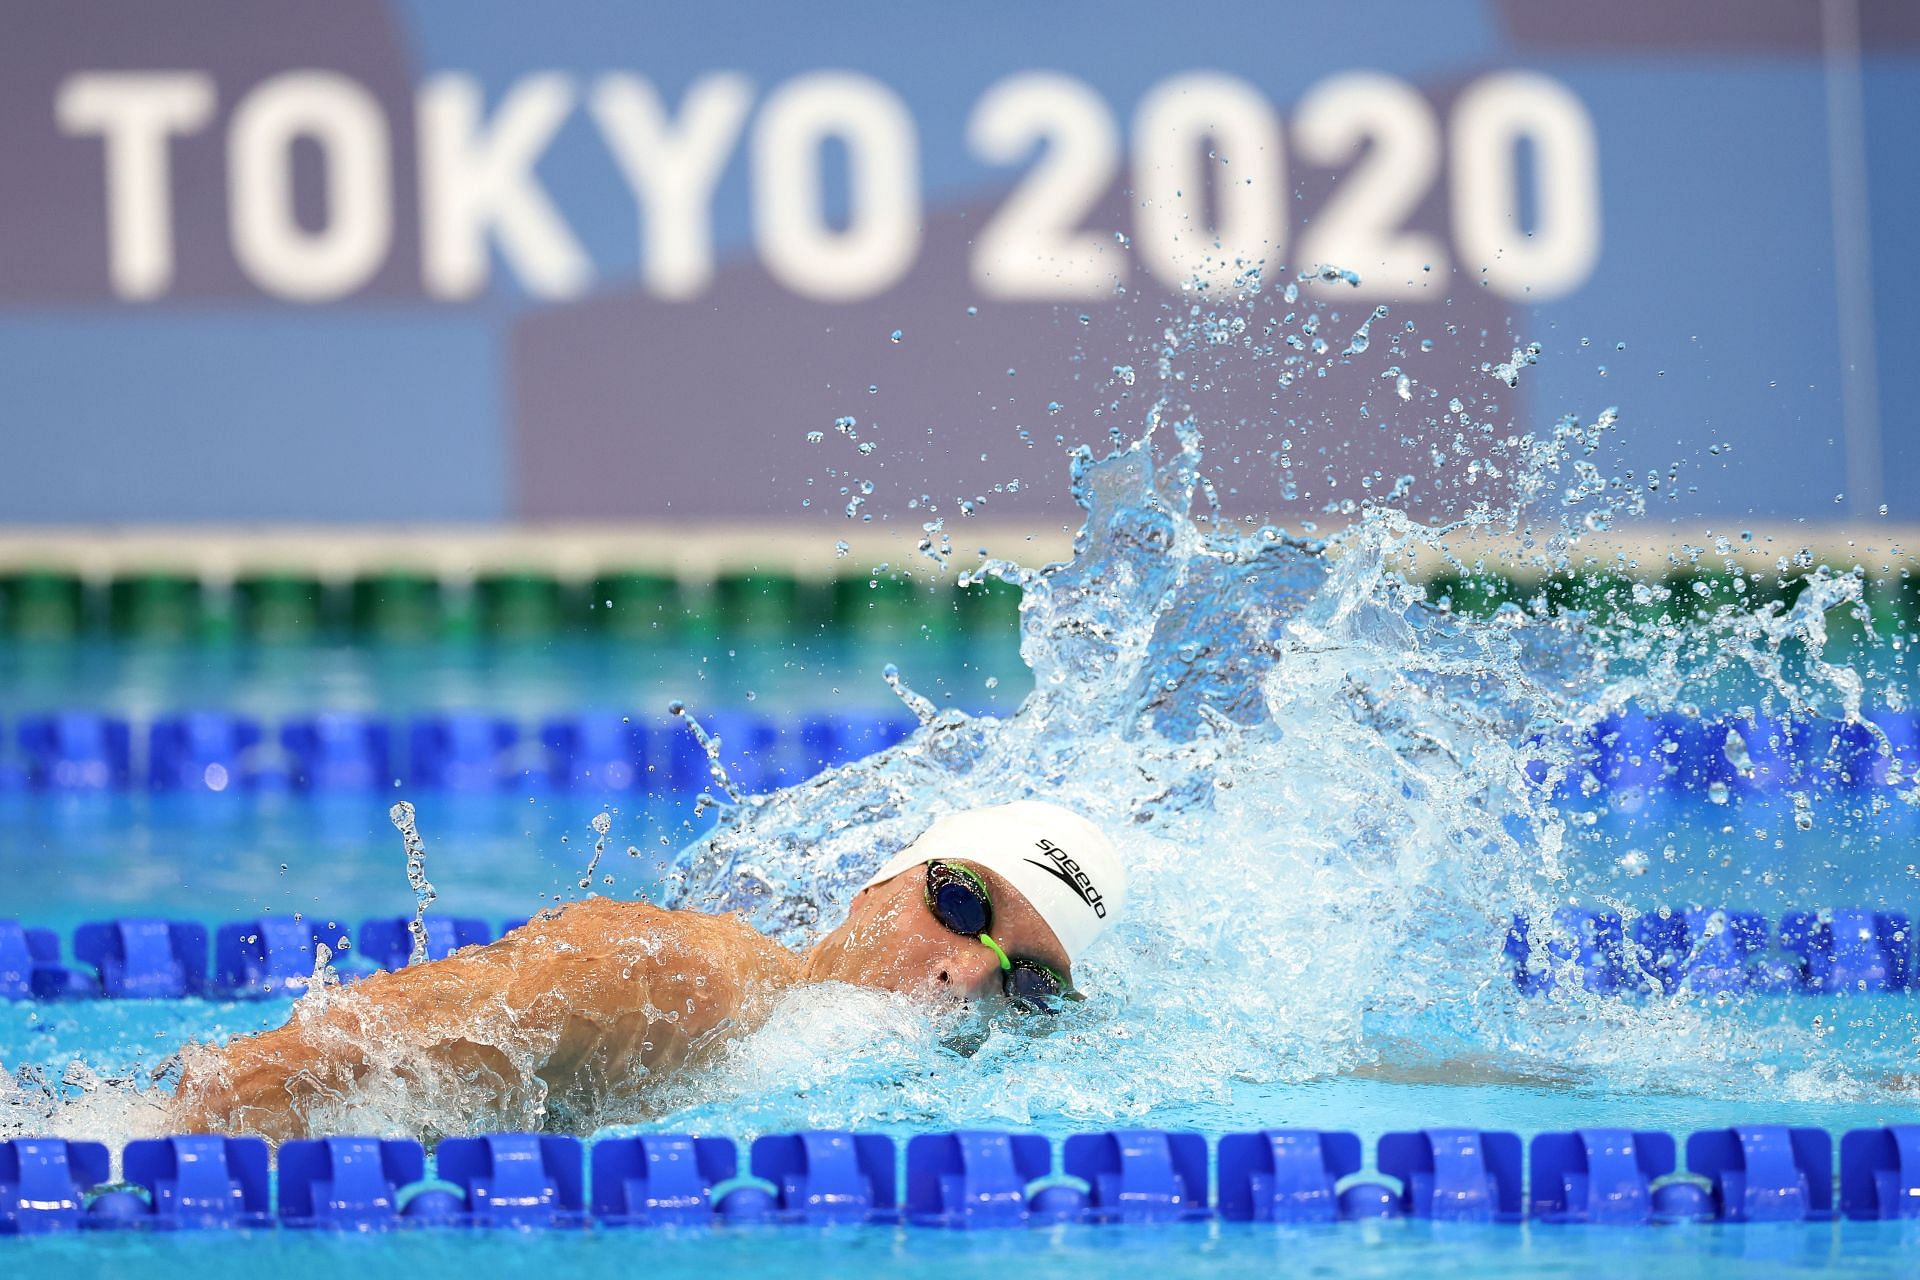 Robert Finke competing in the 800-meter freestyle: Swimming - Tokyo Olympics: Day 4 2021 